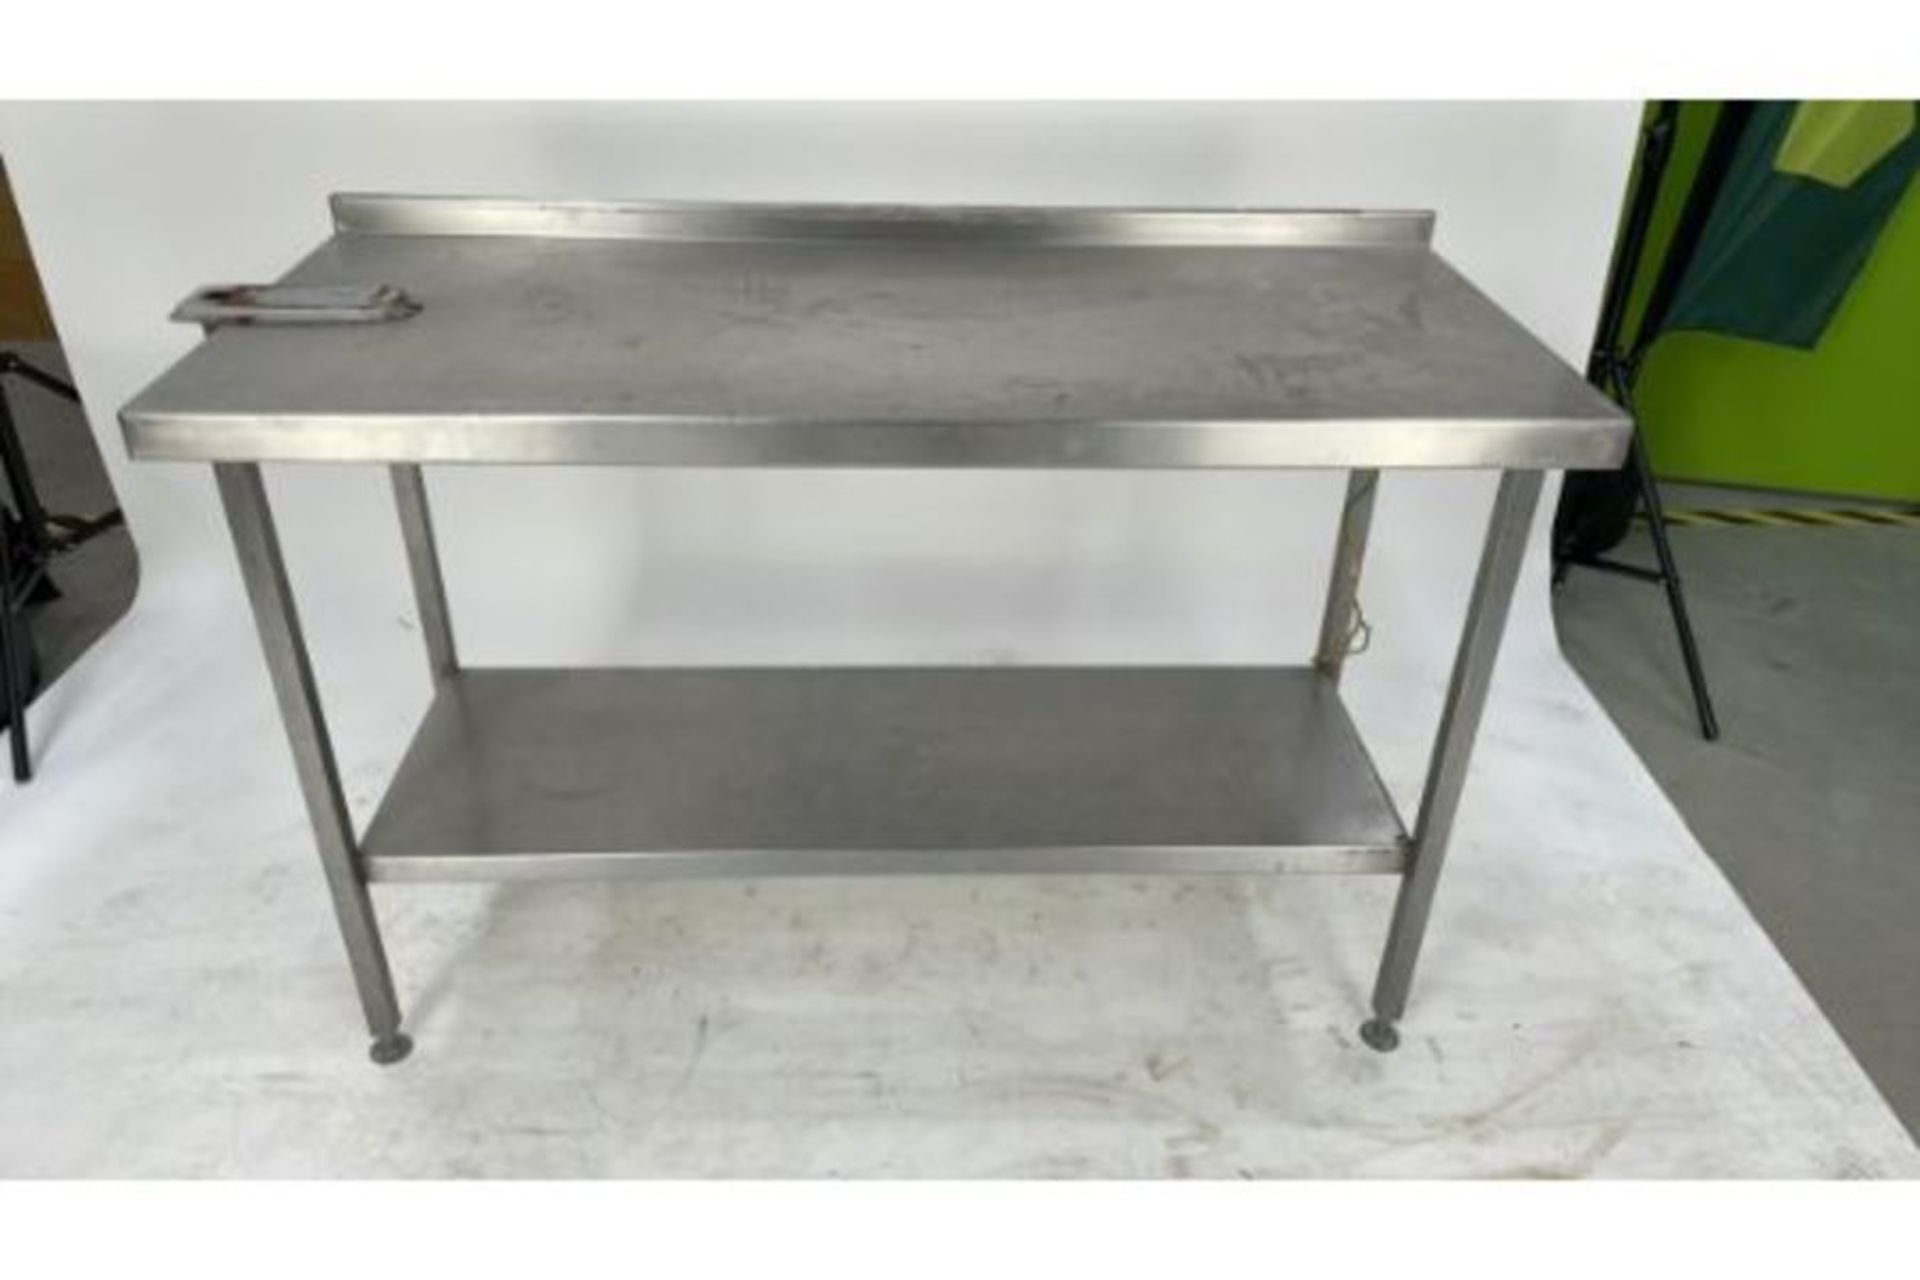 Large Stainless Steel Prep Station.